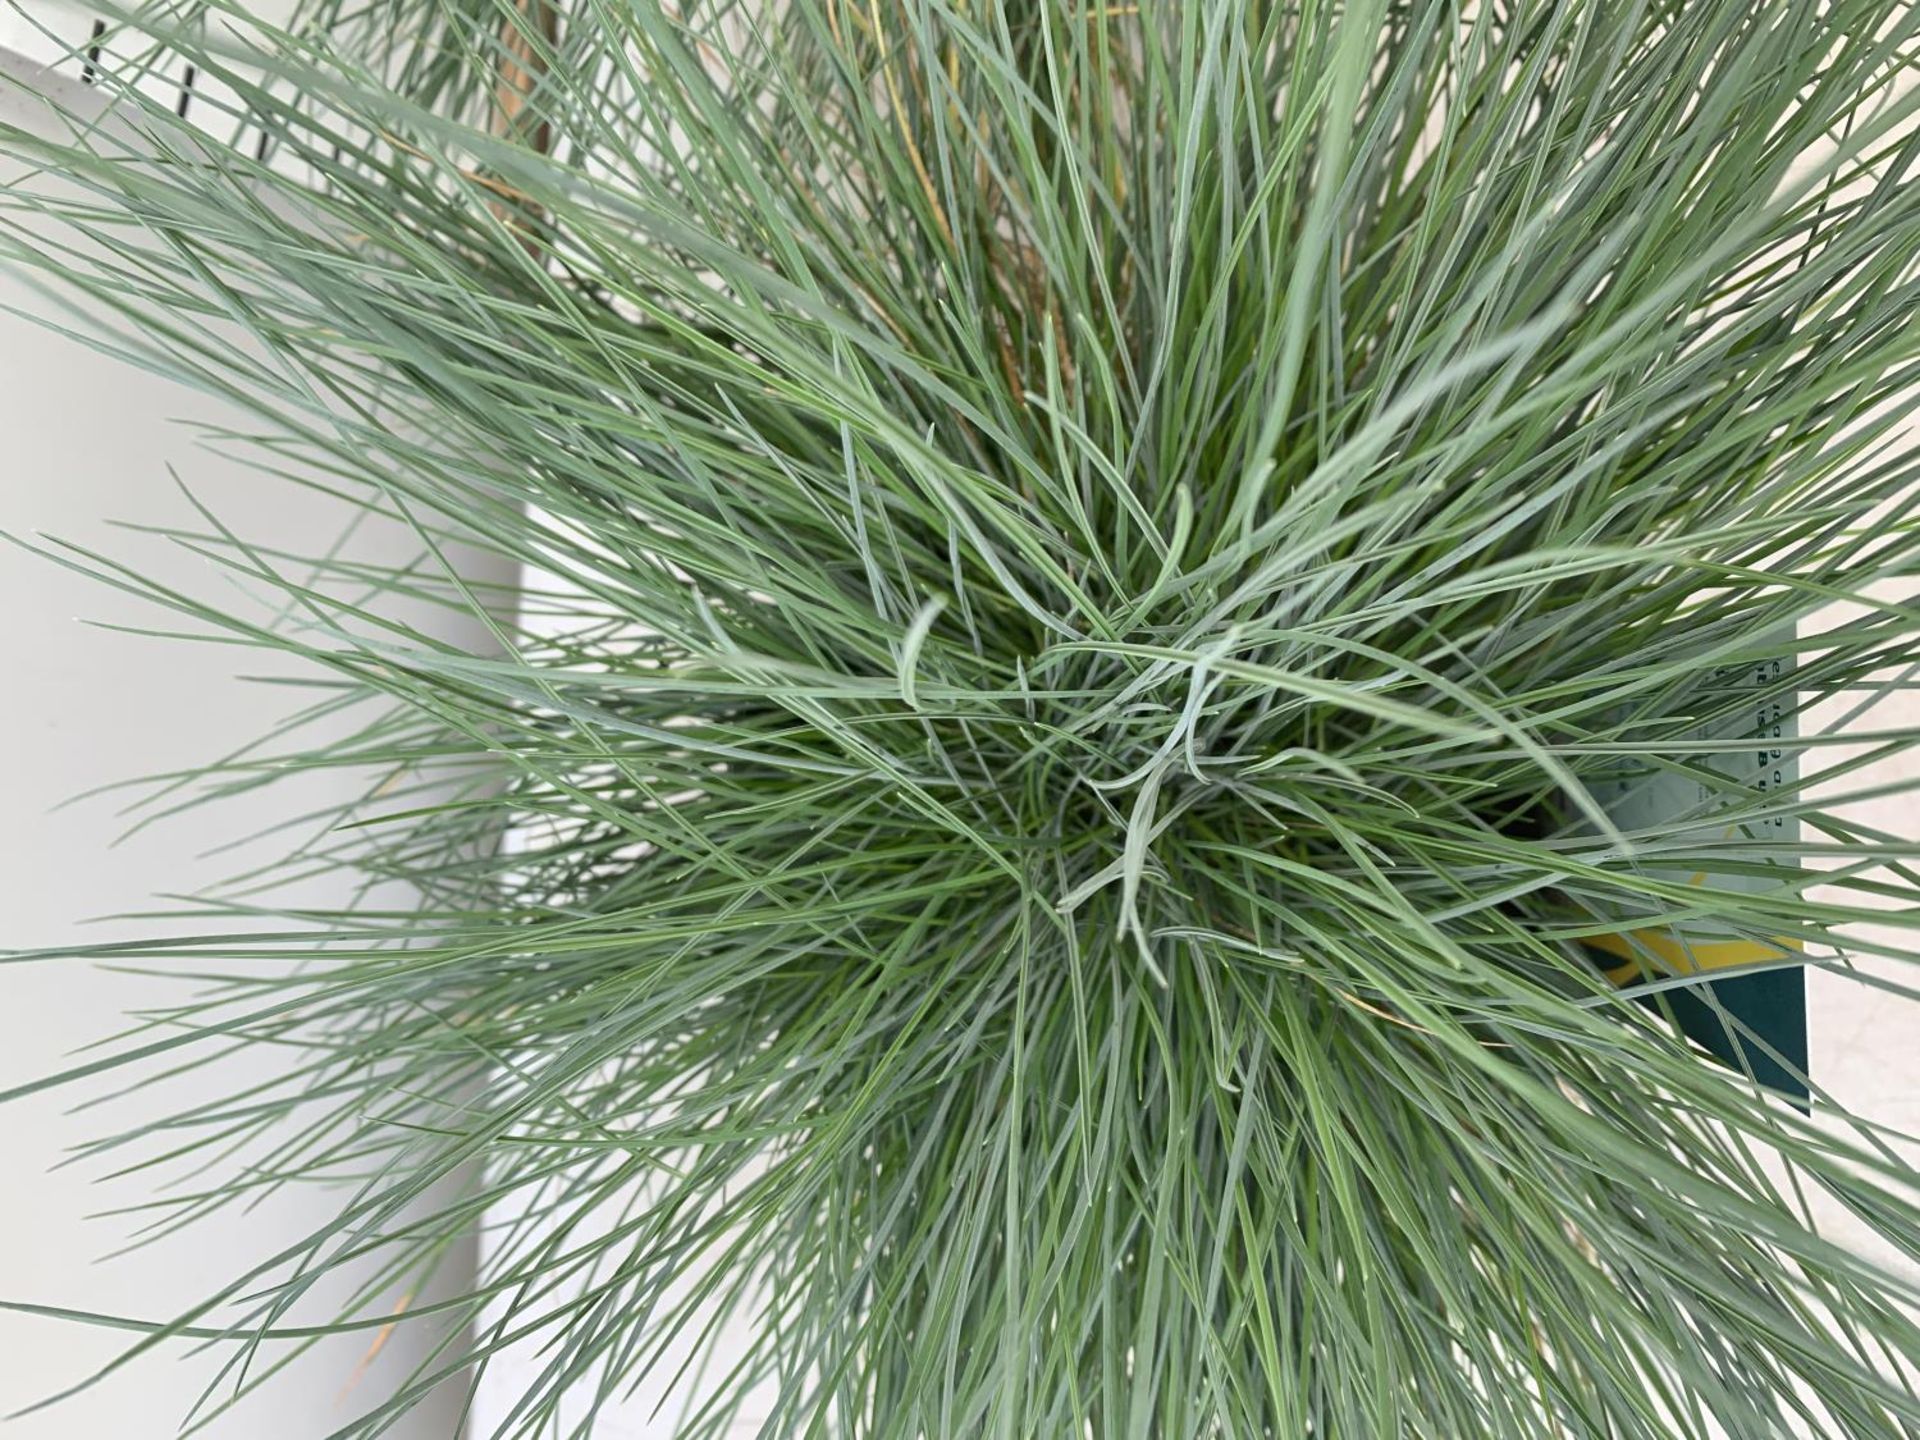 TWO FESTUCA GLAUCA 'INTENSE BLUE' ORNAMENTAL GRASSES IN 2 LTR POTS APPROX 35CM IN HEIGHT PLUS VAT TO - Image 3 of 4